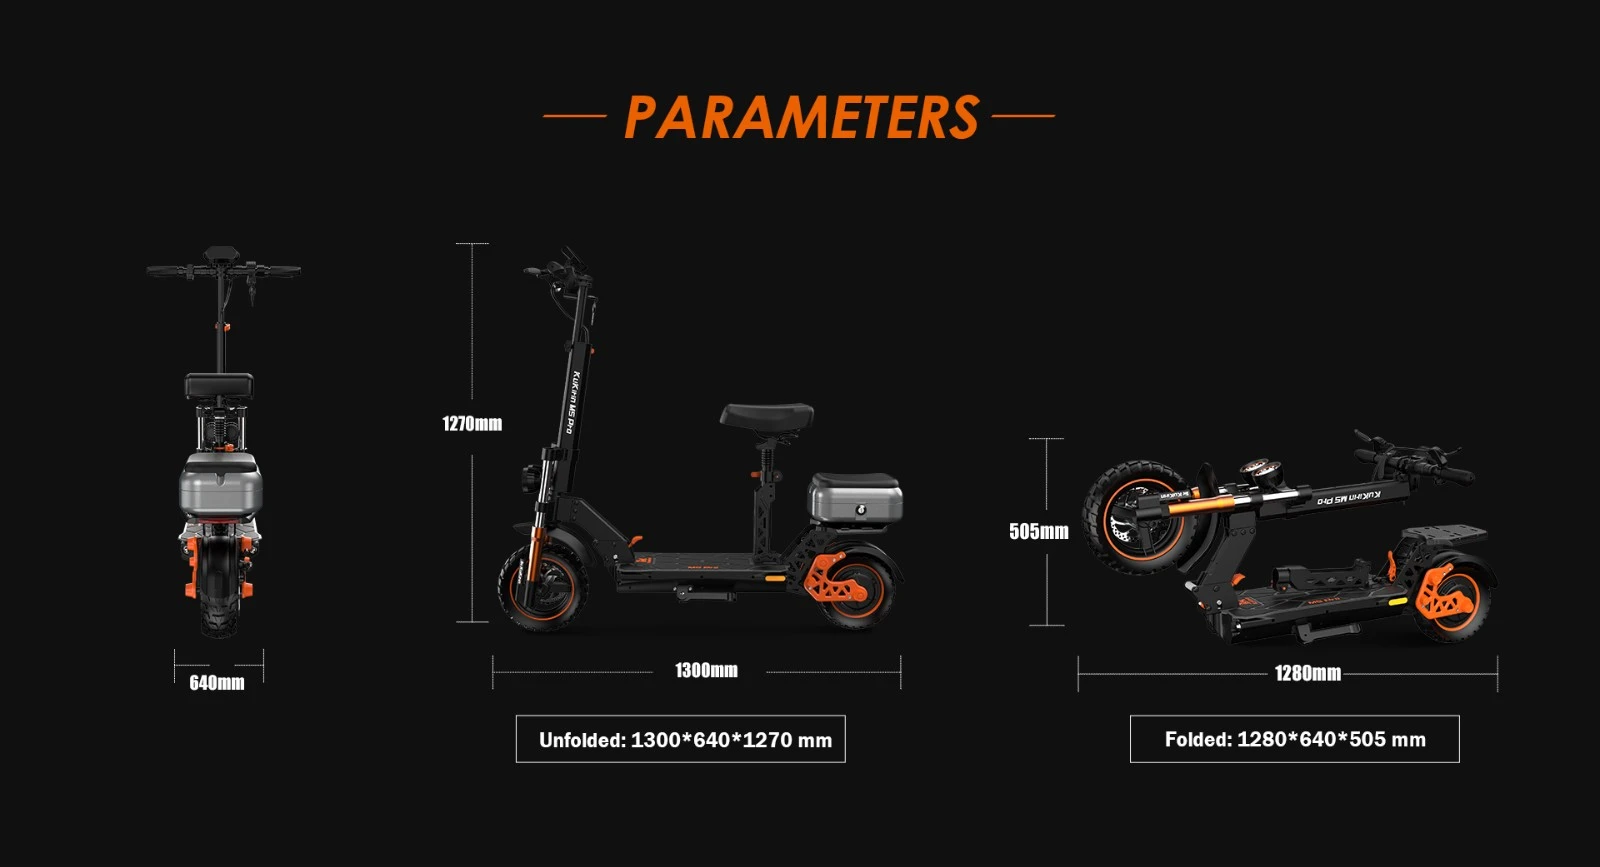 KuKirin M5 Pro Electric Scooter 1000W Motor 52Km/h Max Speed 48V 20Ah Battery With 70KM Range, Dual Disc Brakes, 7 Lights, Multiple Speed Modes 120KG Max Load with Detachable Seat